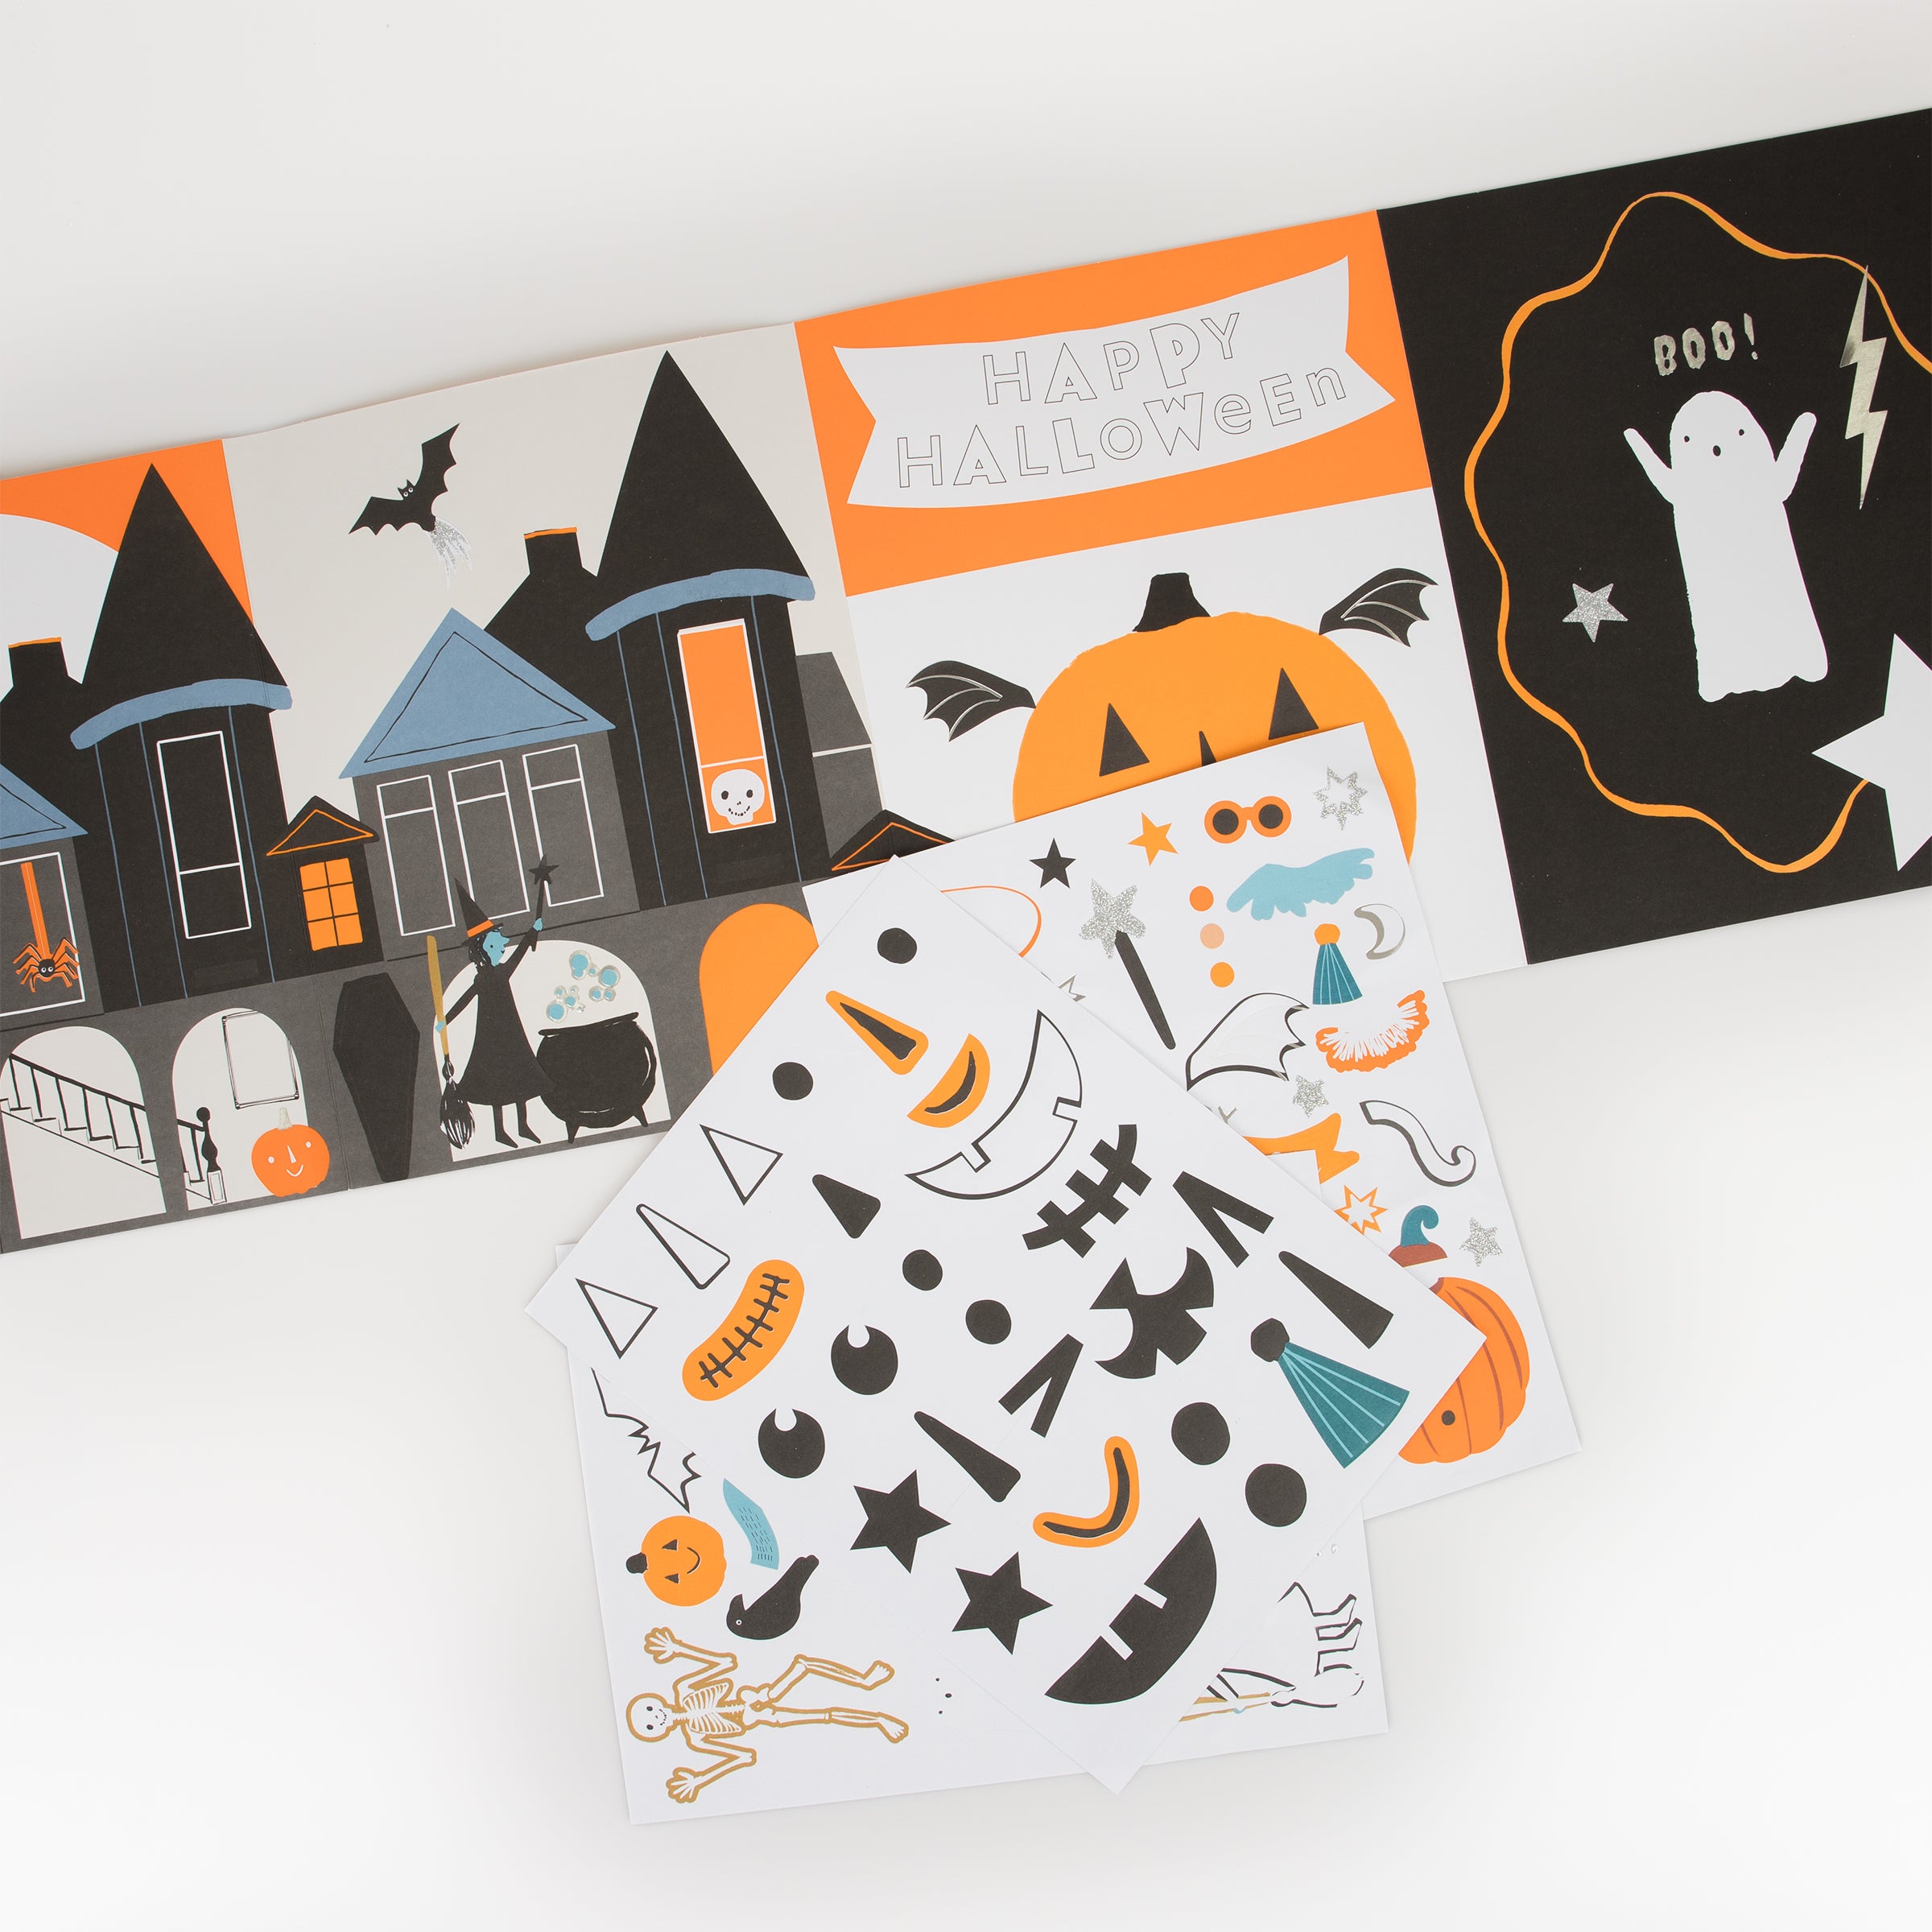 Our Halloween poster, with Halloween stickers, is a fabulous Halloween craft for kids.